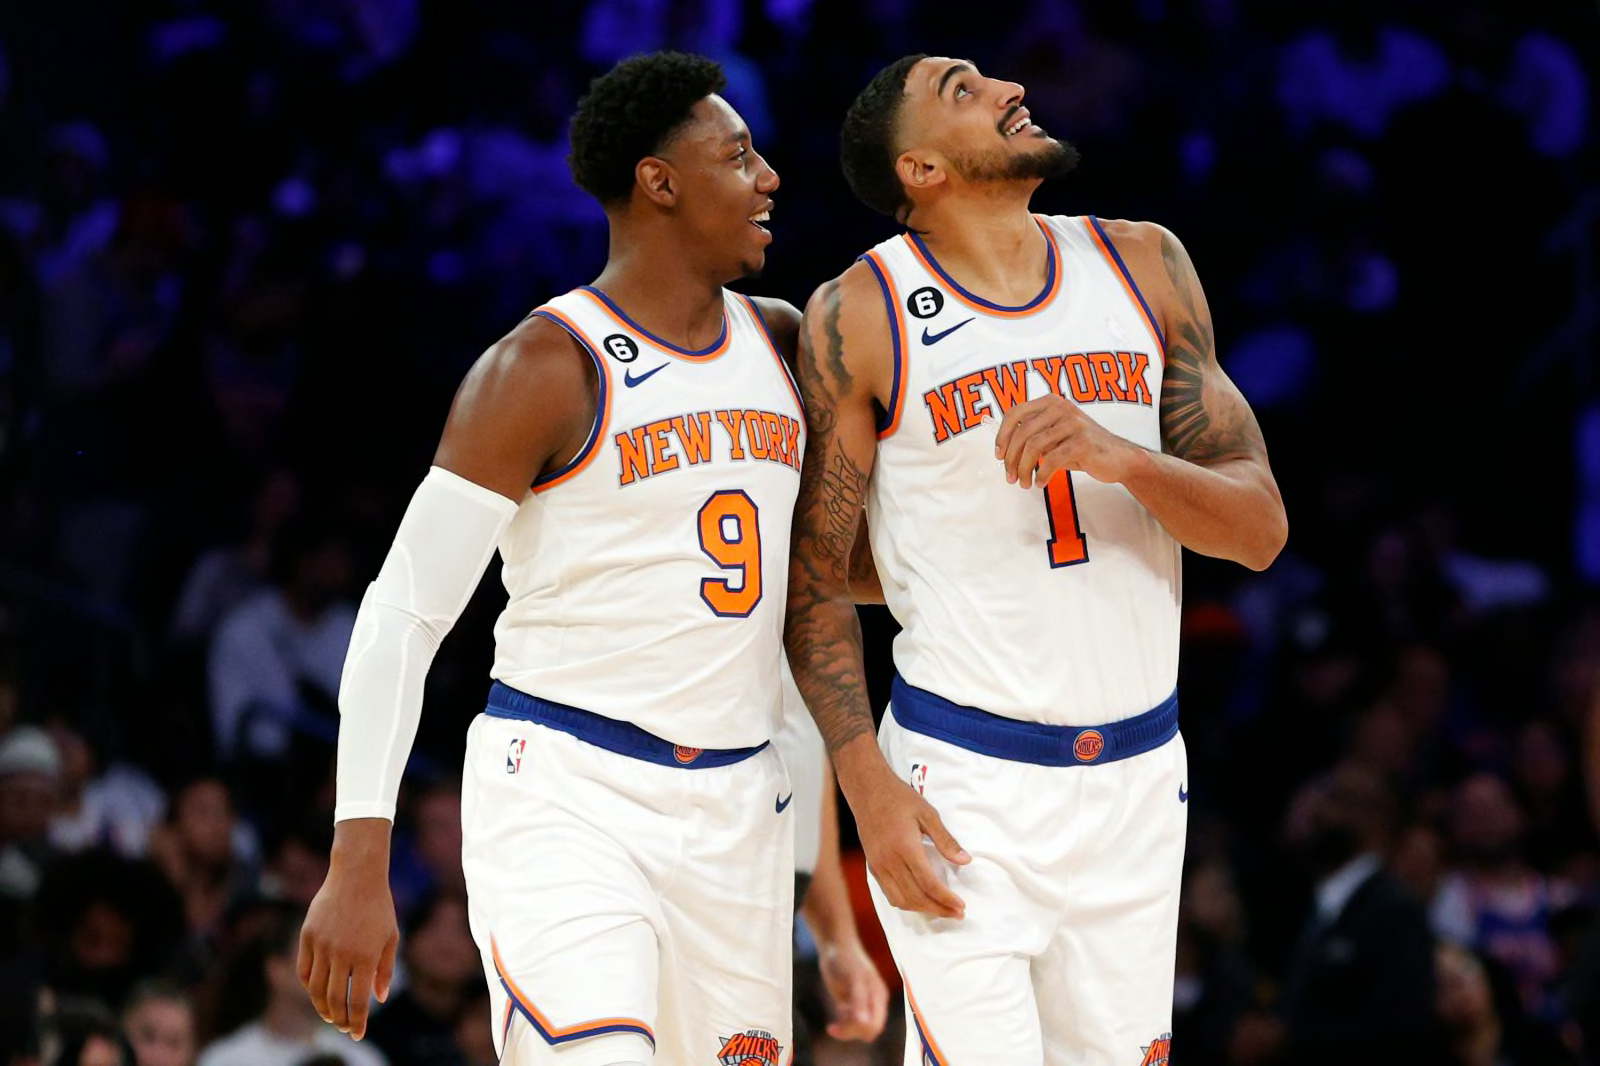 New York Knicks 4 questions about the future that must be addressed